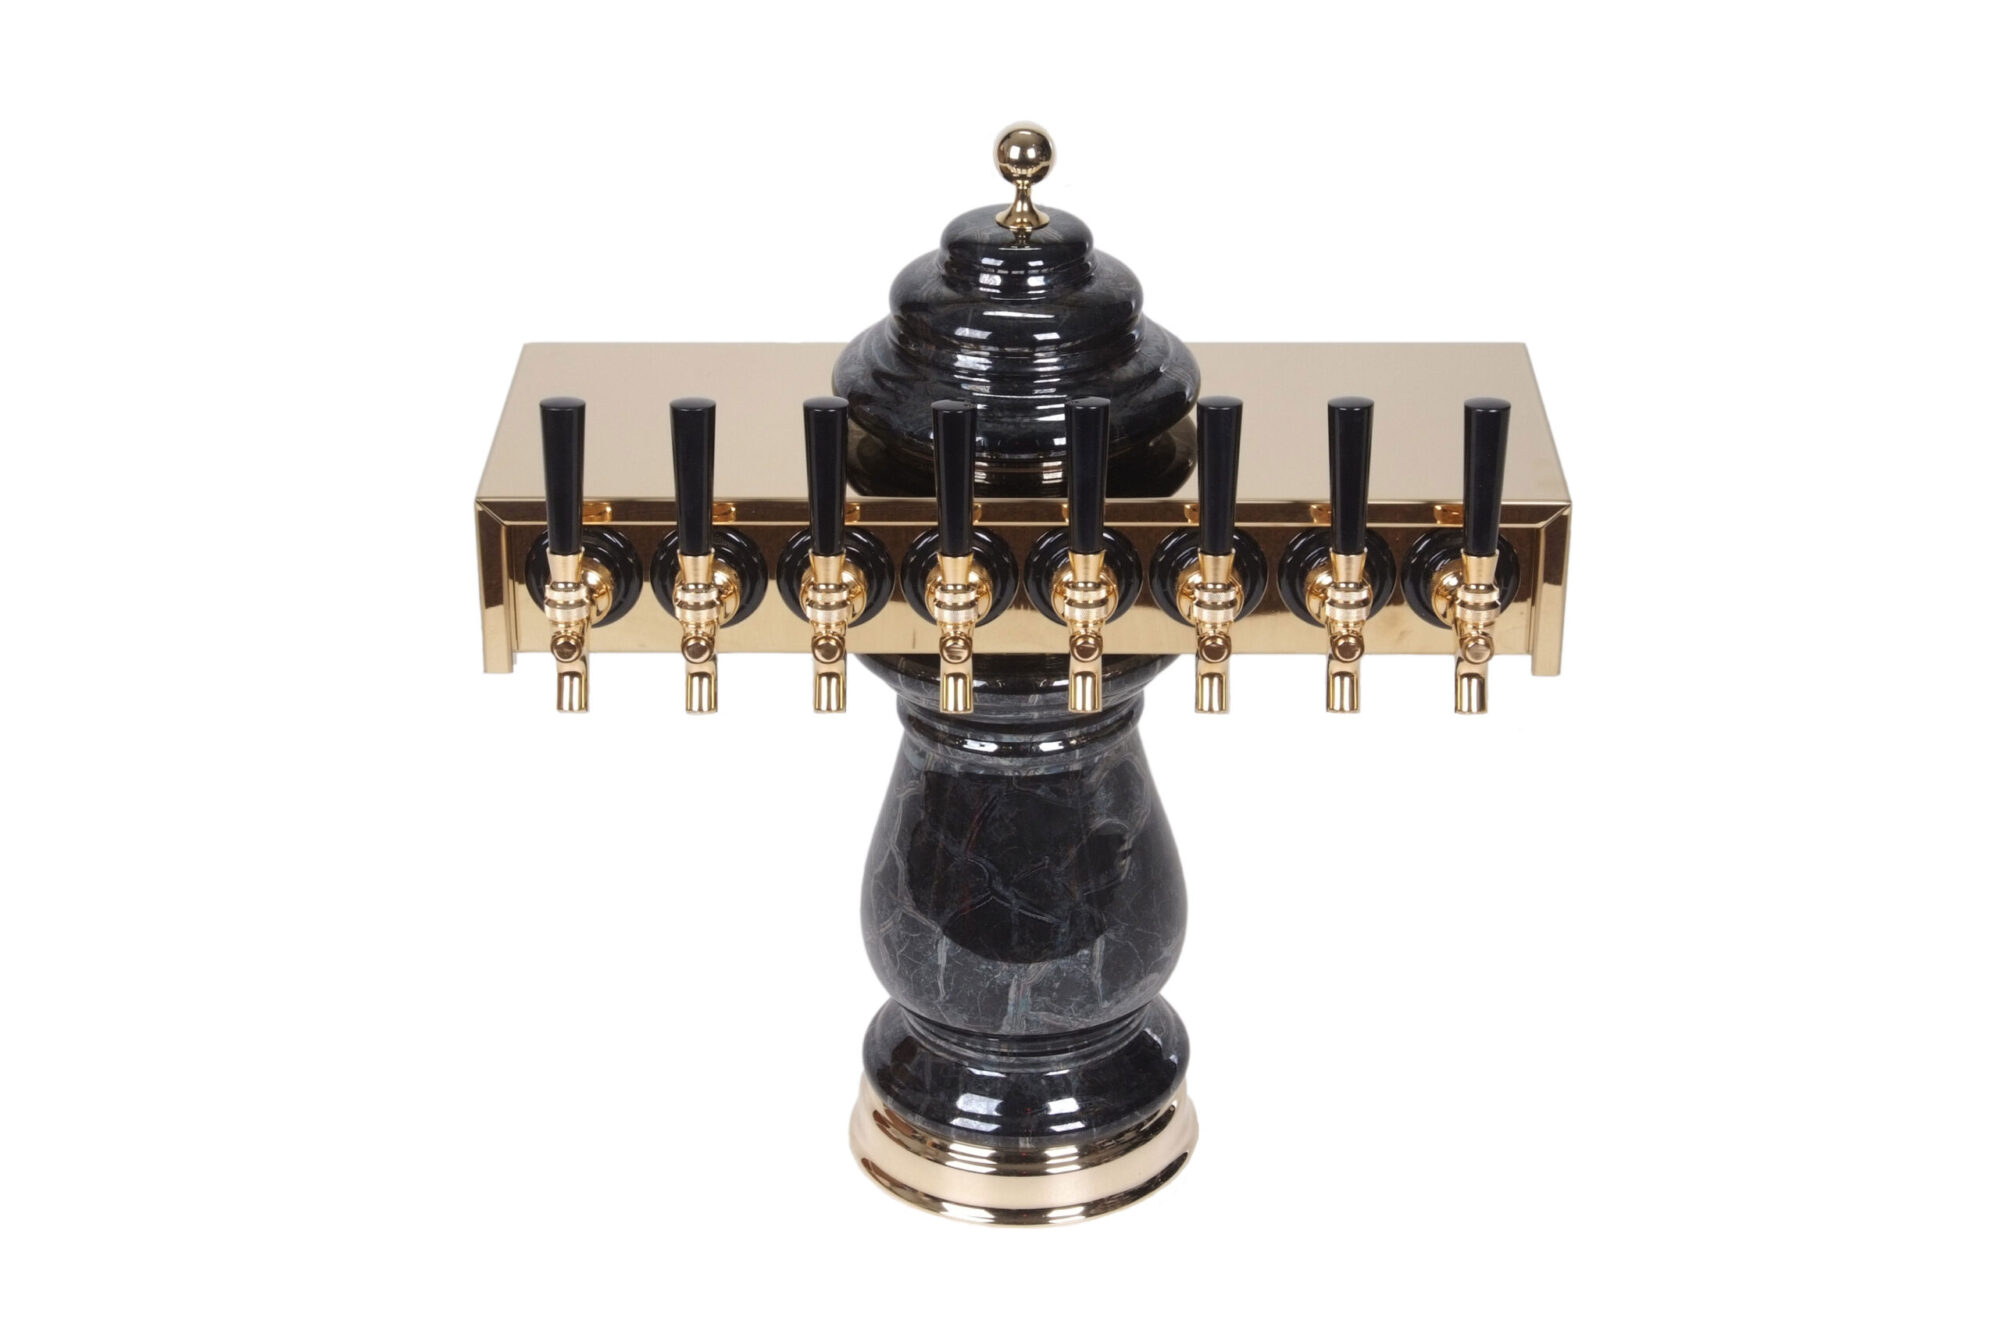 887B-8 -- Eight Faucet Ceramic T-Tower with PVD Brass Top and Faucets - Shown in Black Marble Ceramic